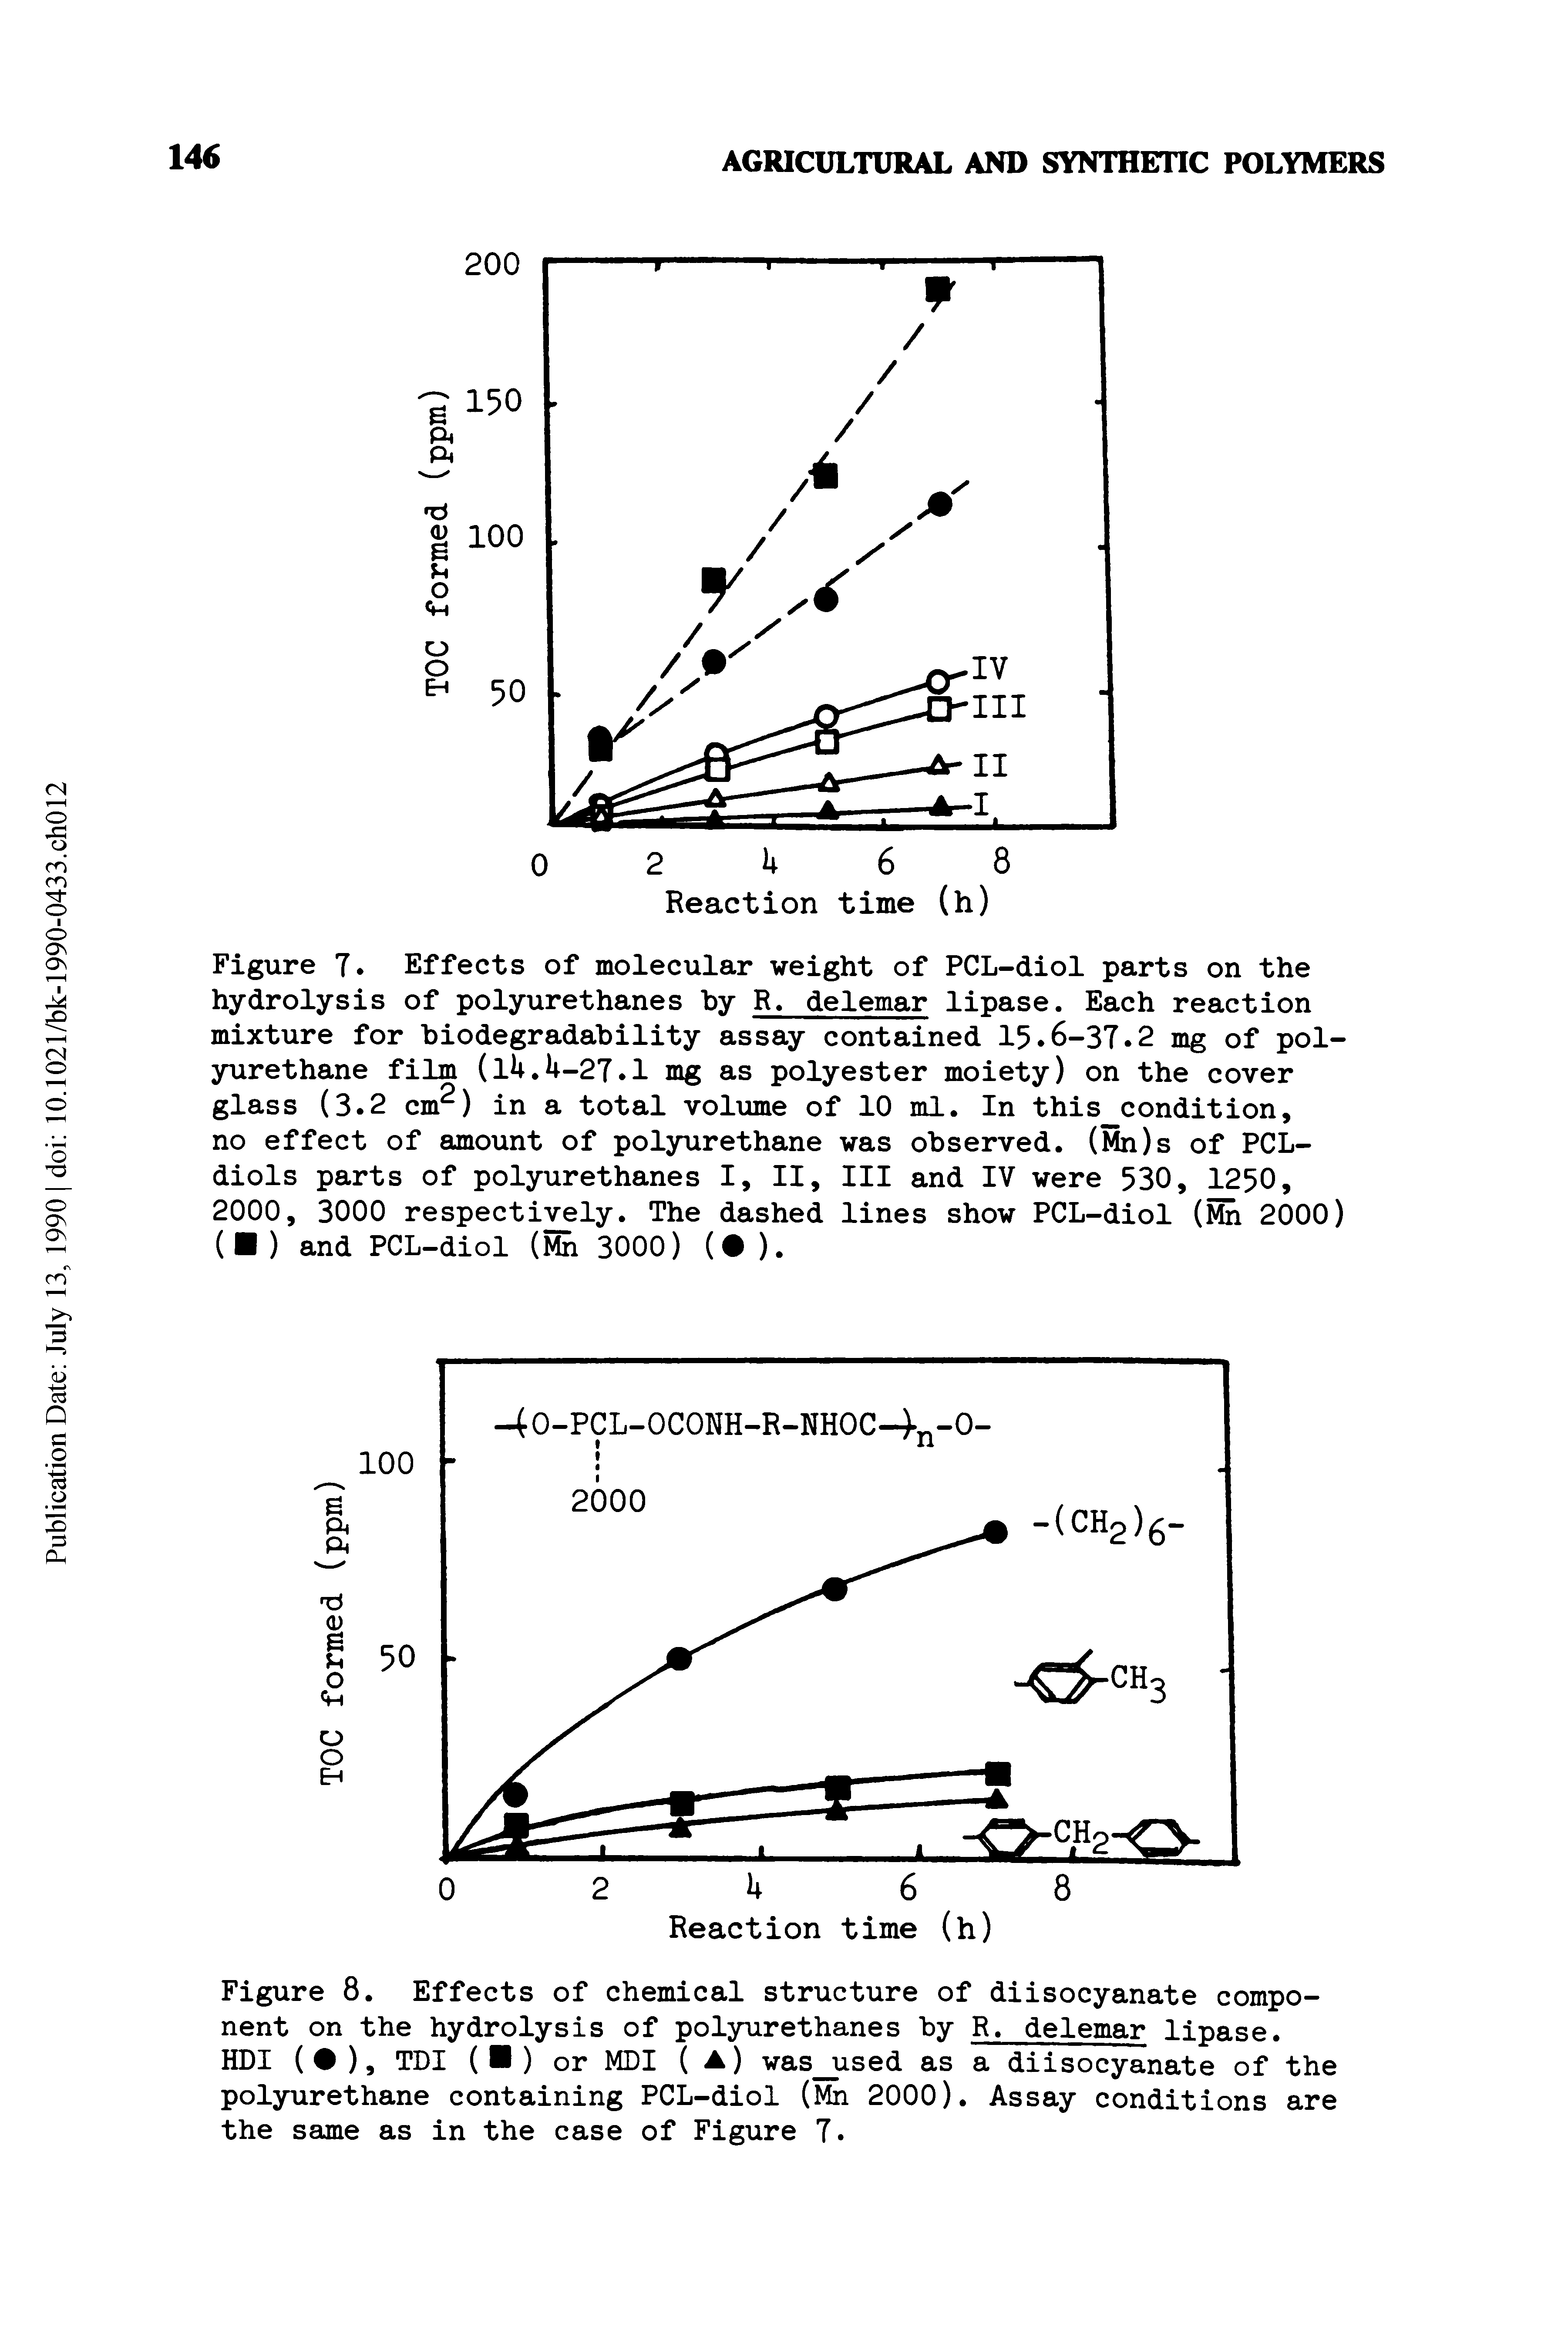 Figure 8. Effects of chemical structure of diisocyanate component on the hydrolysis of polyurethanes by R. delemar lipase.